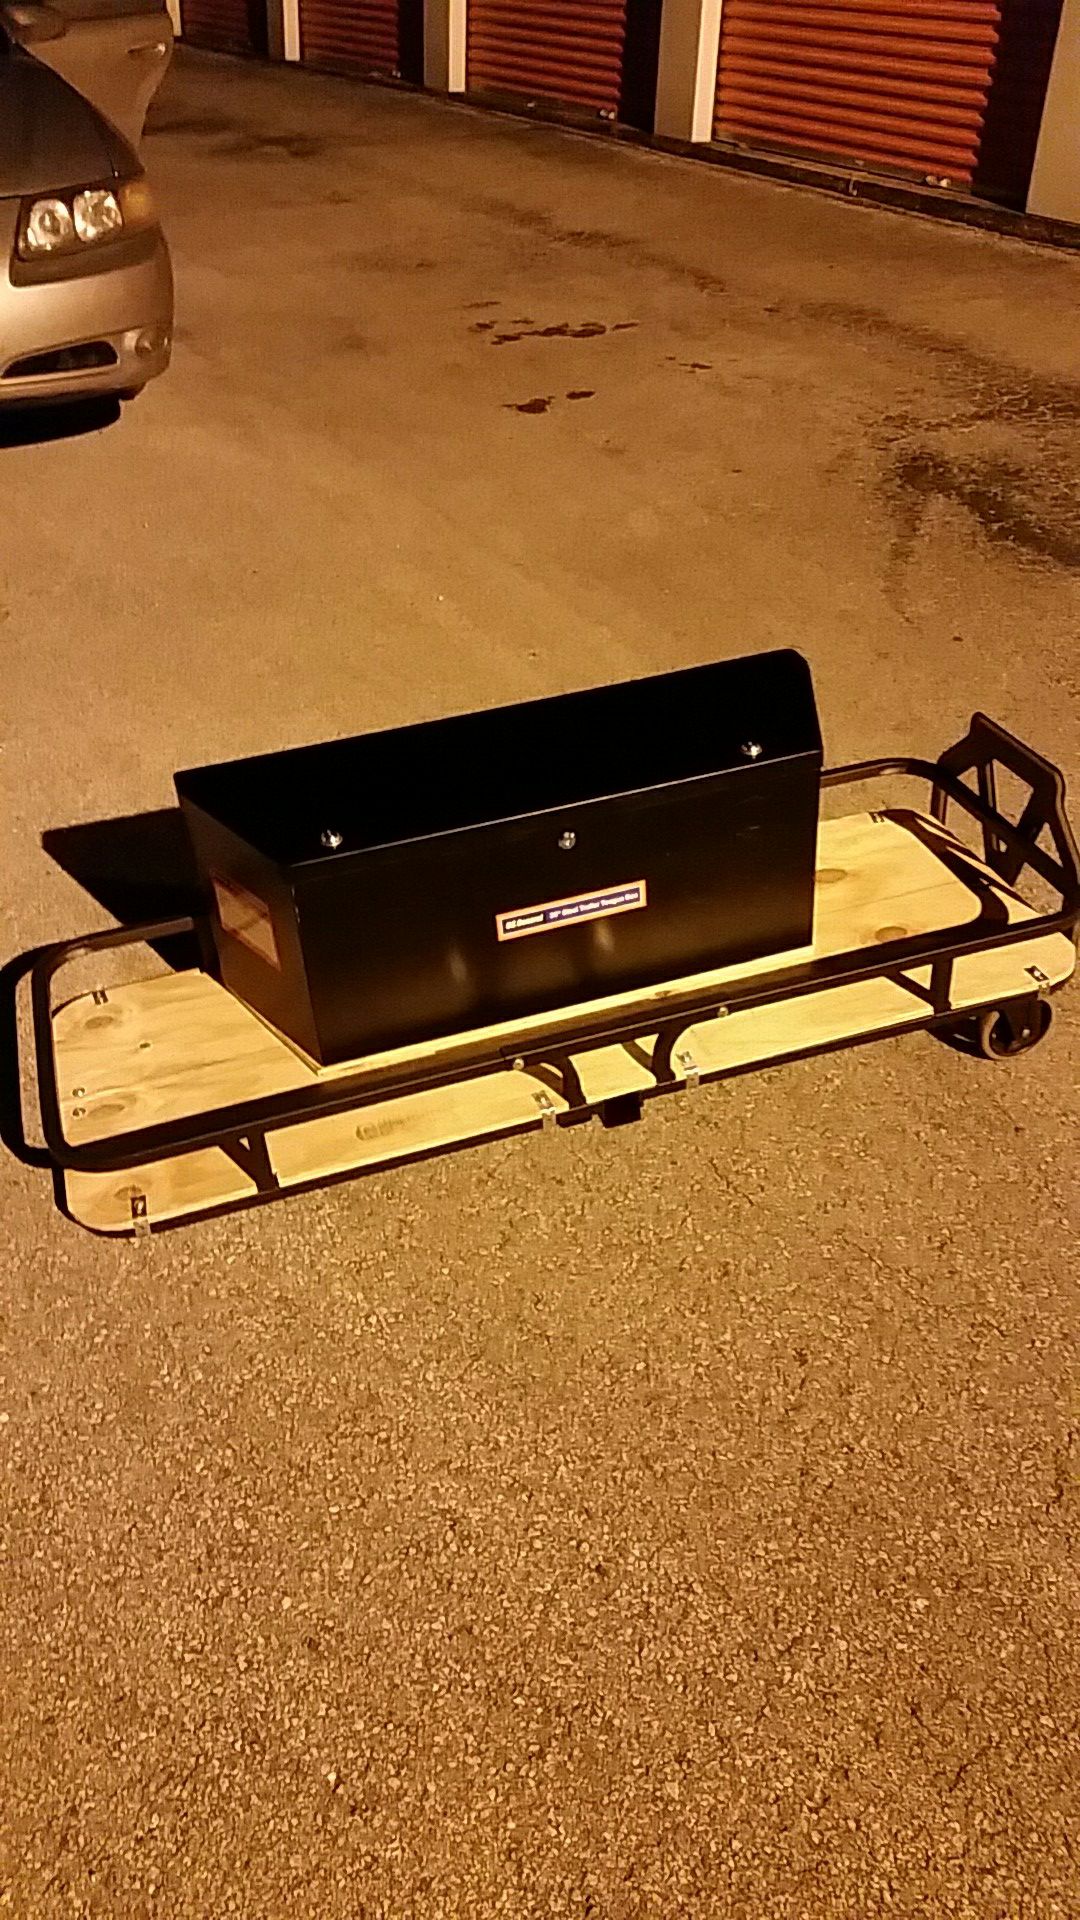 Haul Master hitch carrier with utility box